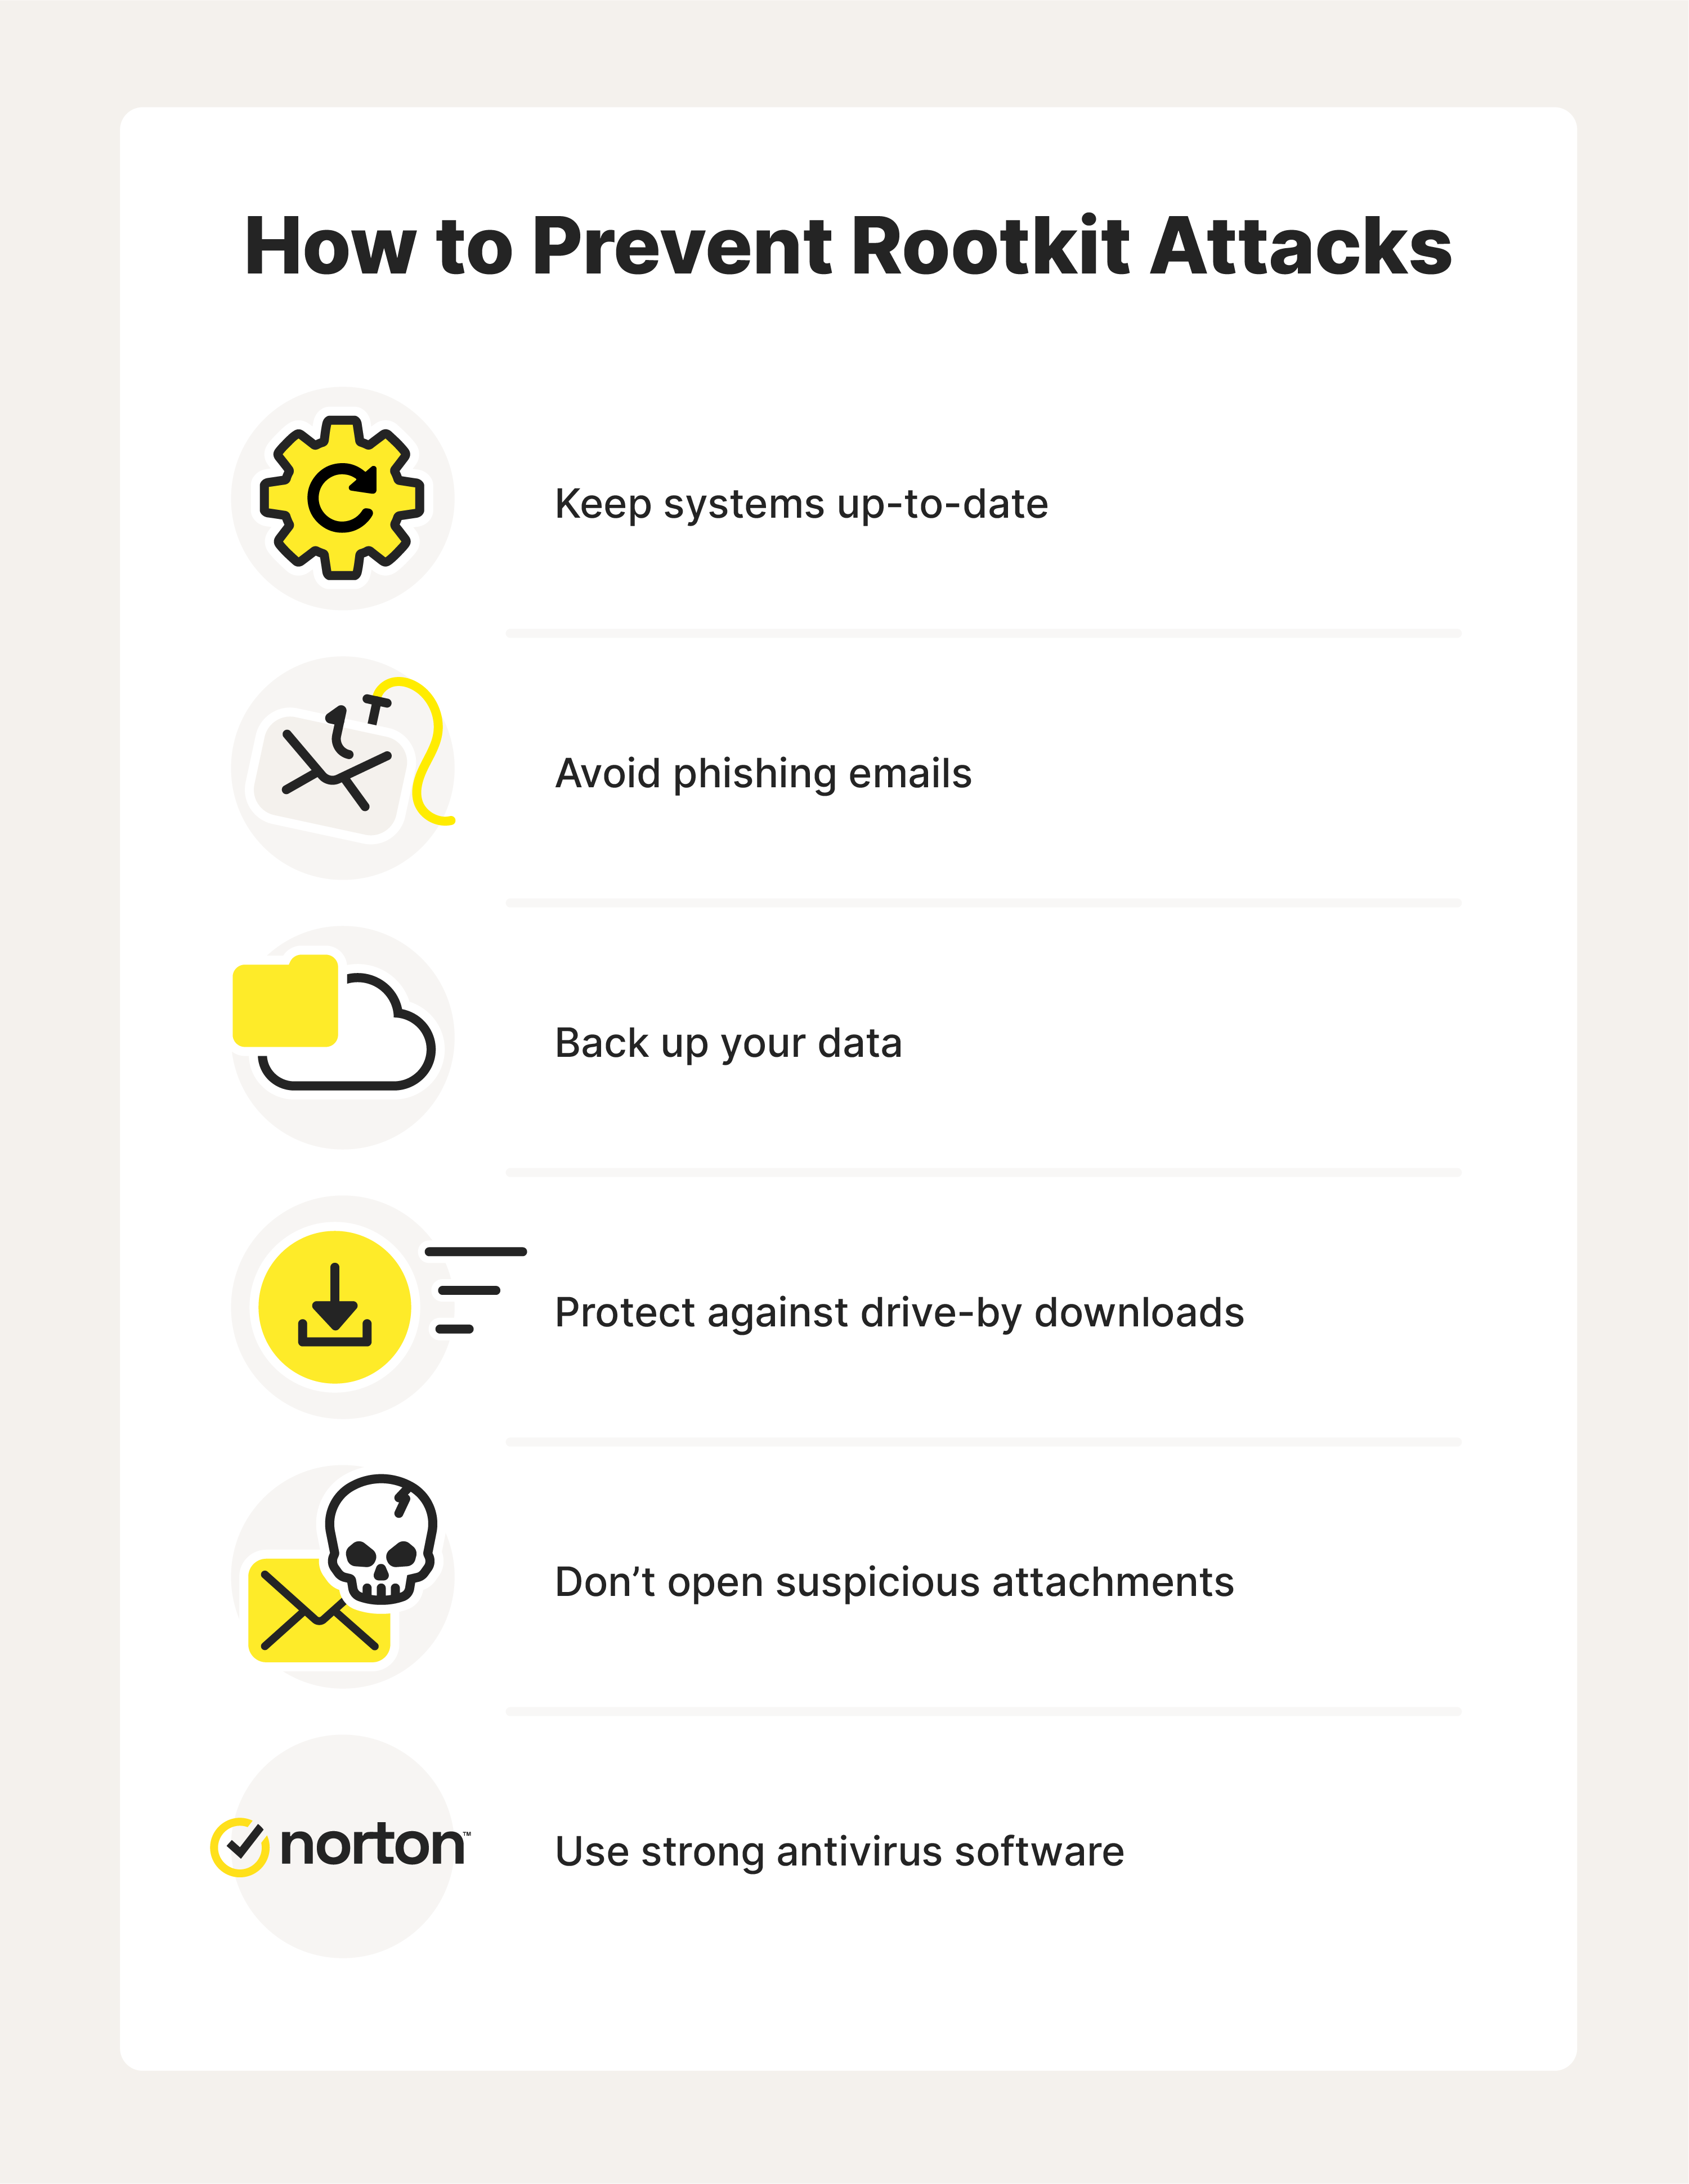 A gear, envelope, cloud, download, and Norton icon all represent avenues for how to prevent rootkit attacks.